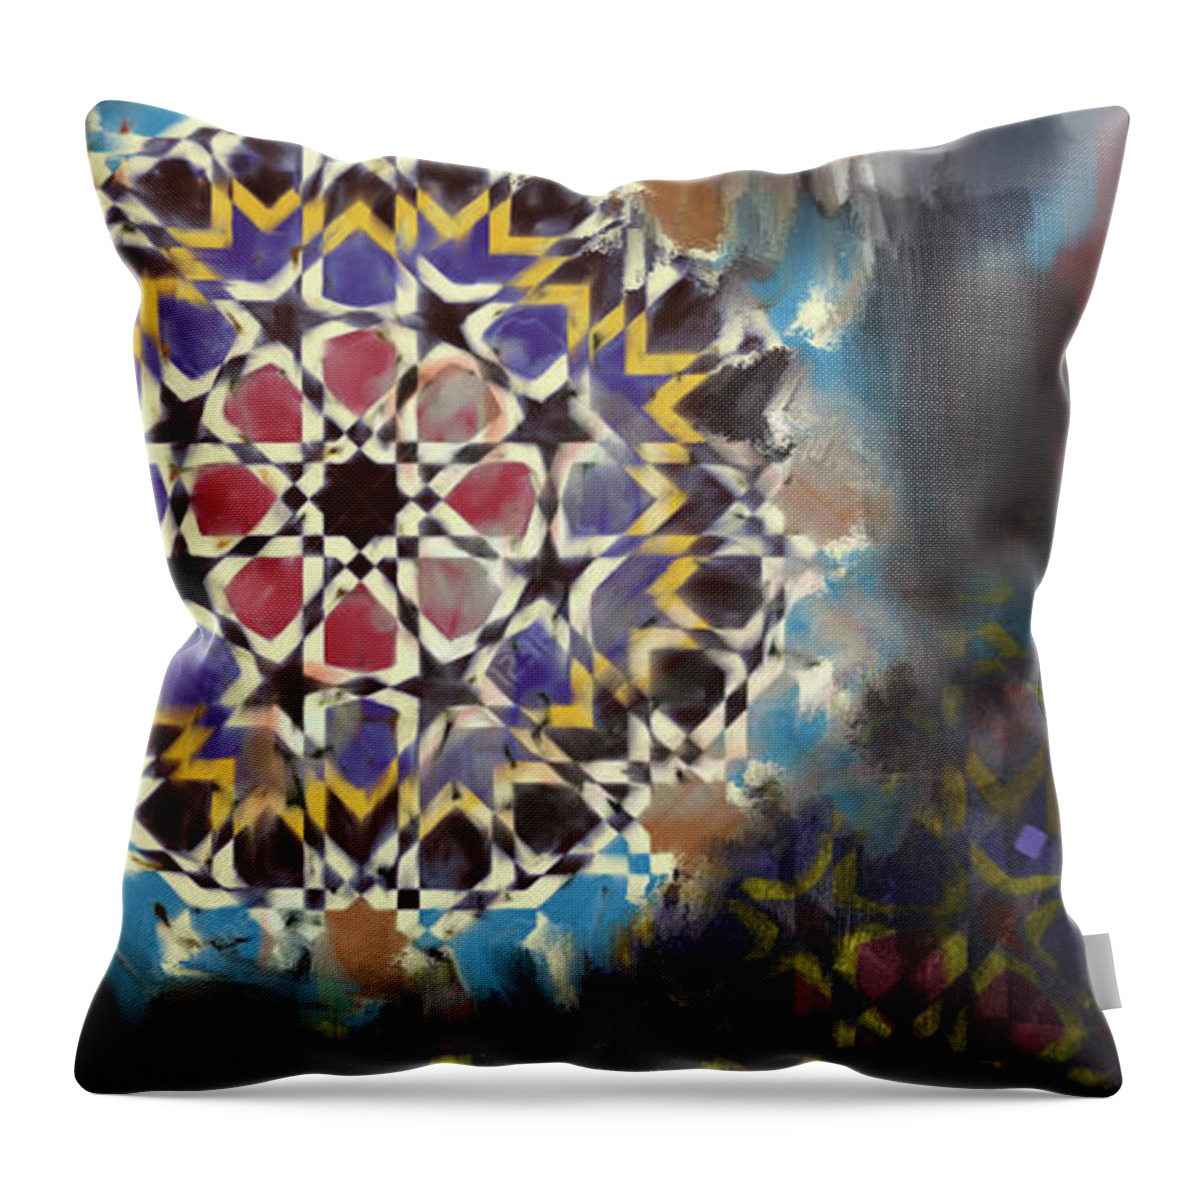 Motif Throw Pillow featuring the painting Spanish 167 2 by Mawra Tahreem